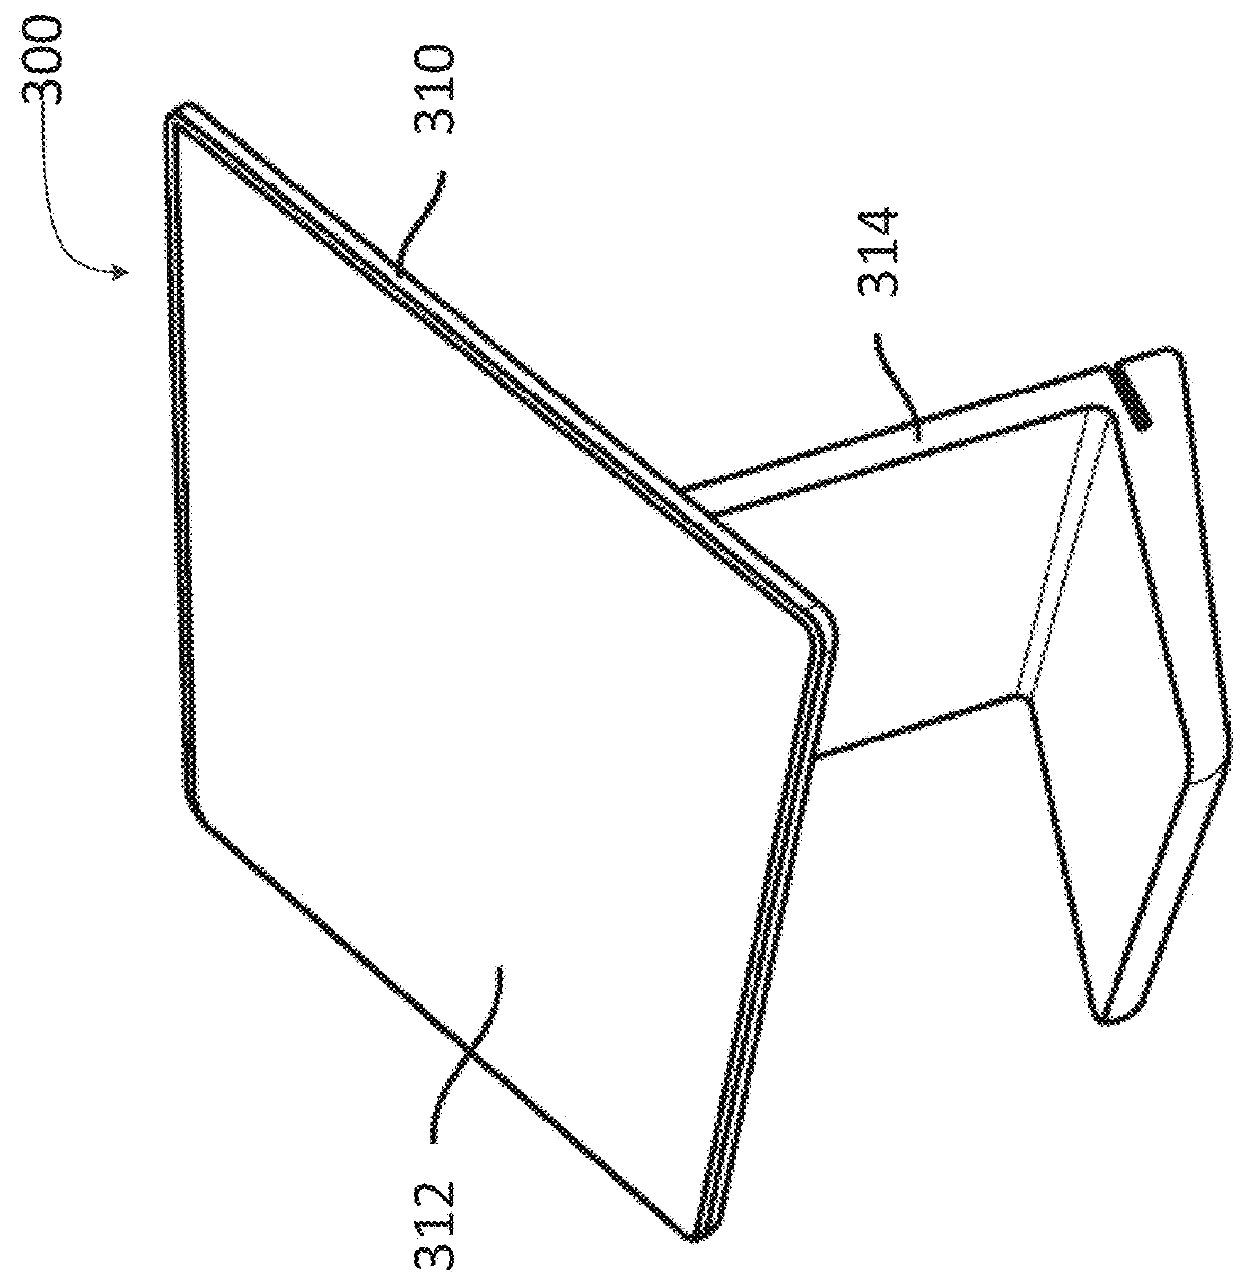 Tactile overlay for touchscreen device